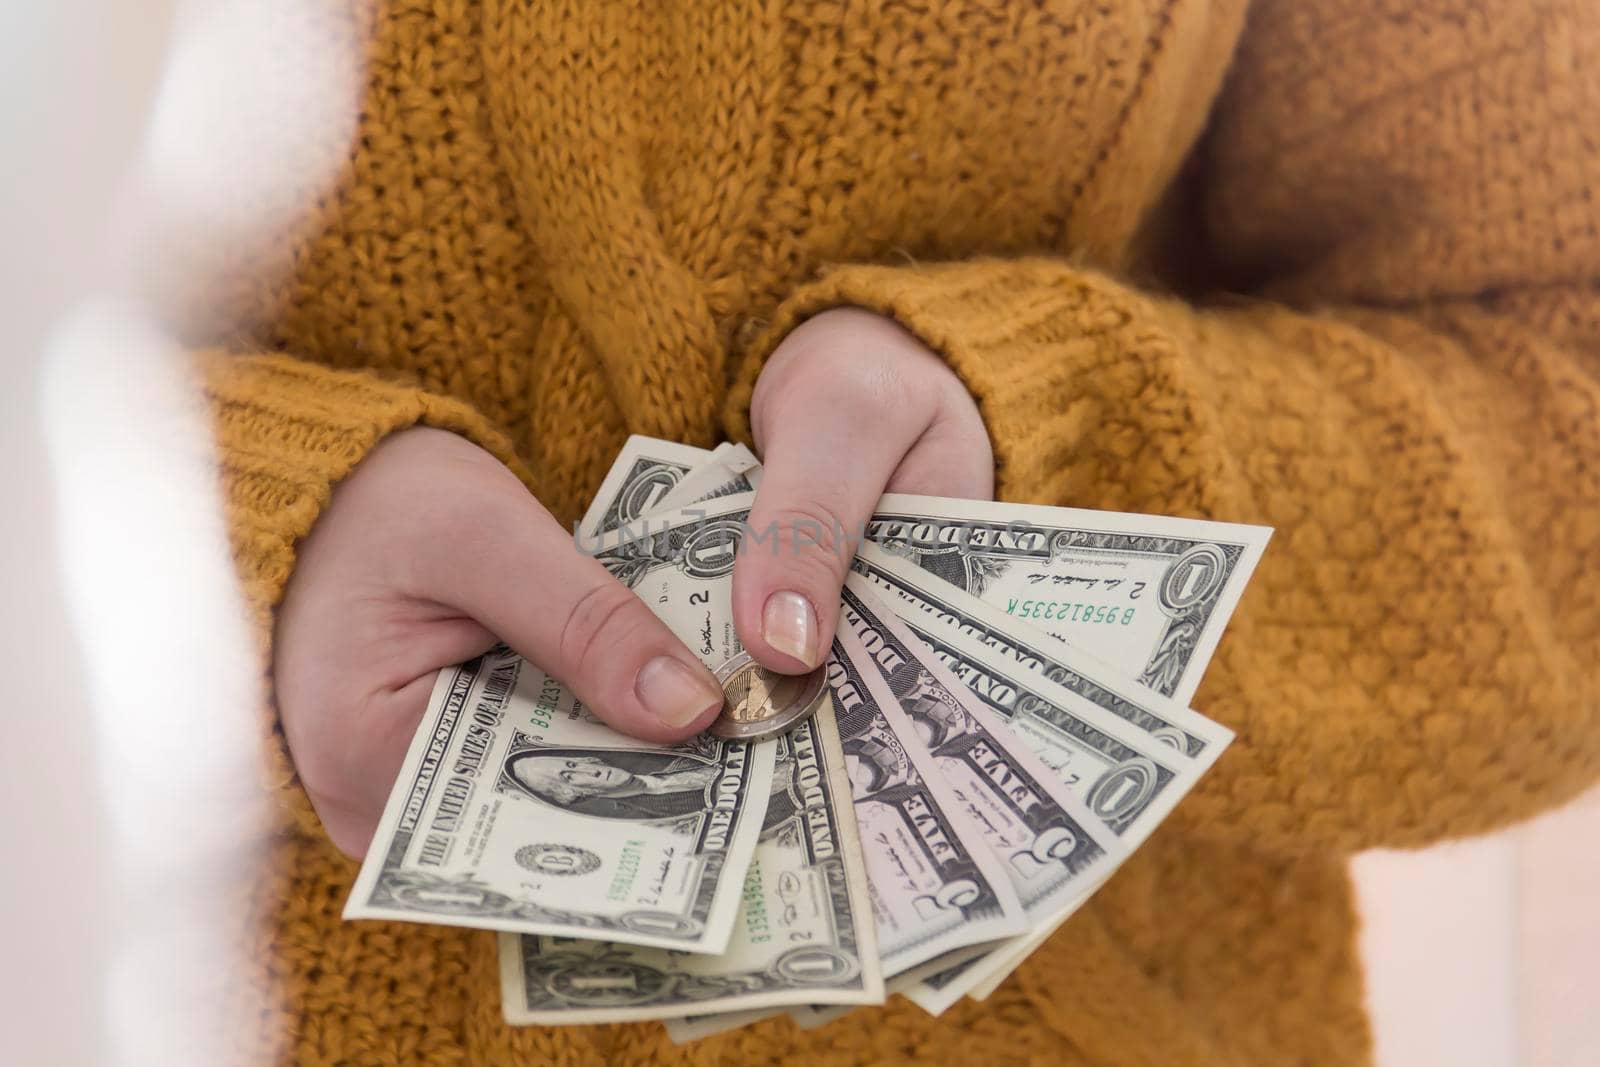 Women's hands in a yellow sweater hold small dollar bills..